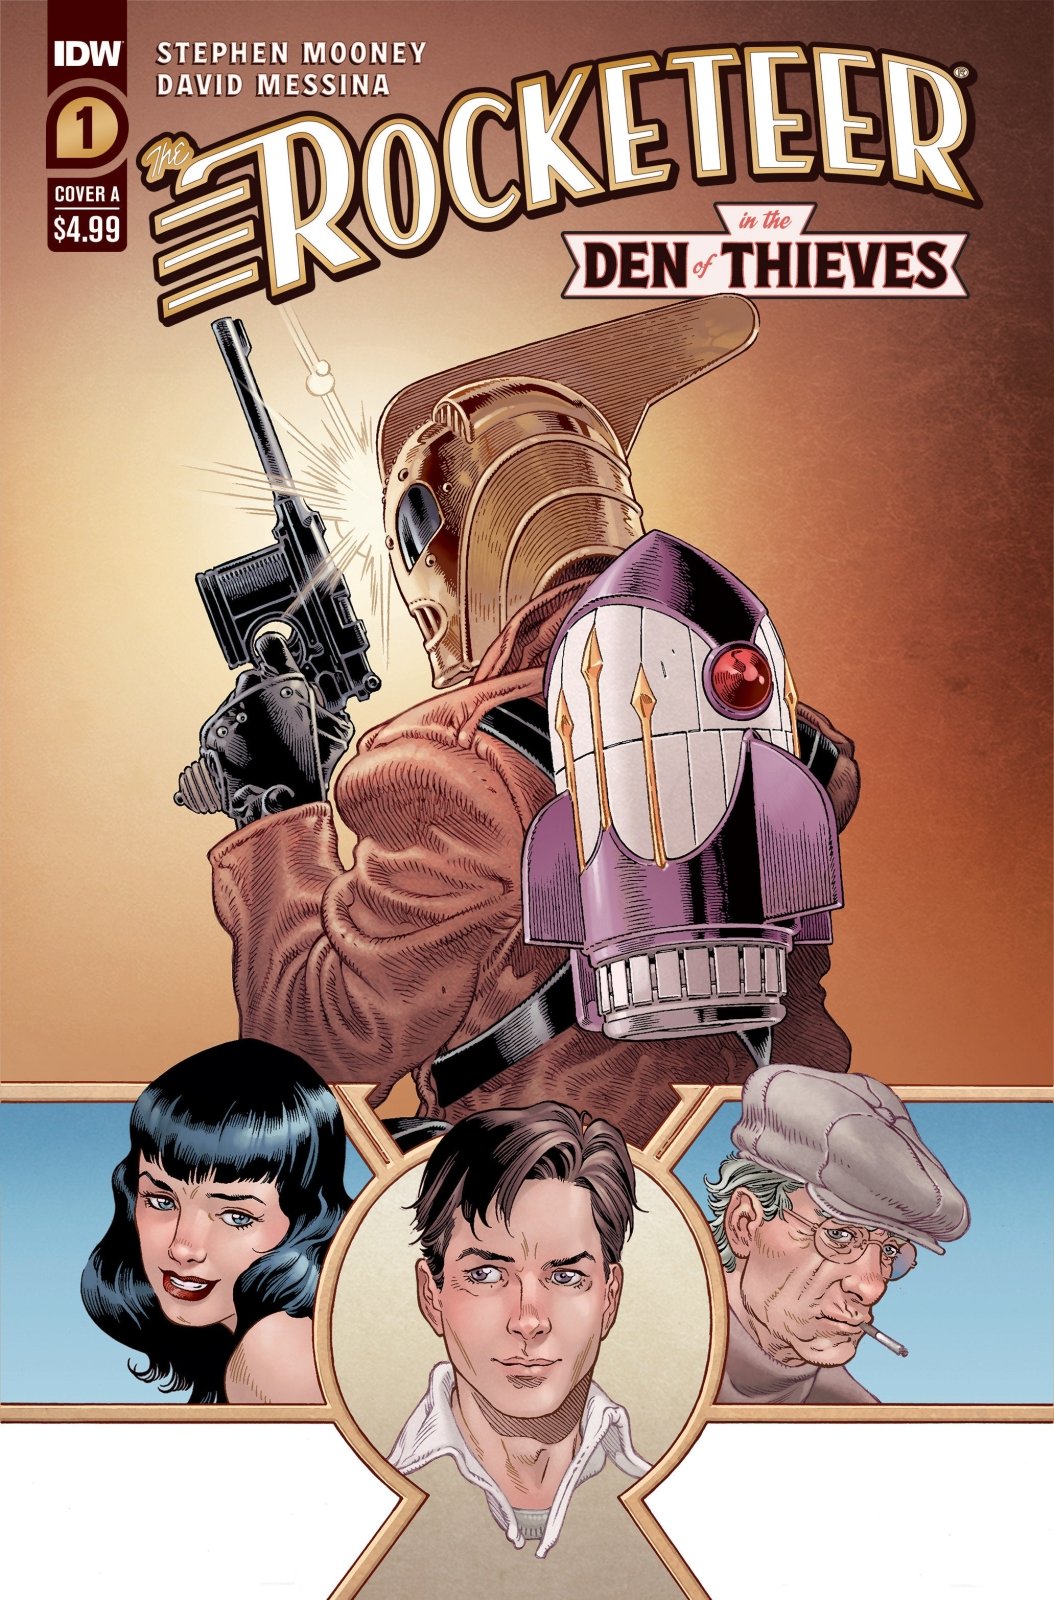 The Rocketeer: In The Den Of Thieves #1 Cover A (Rodriguez) - The Fourth Place